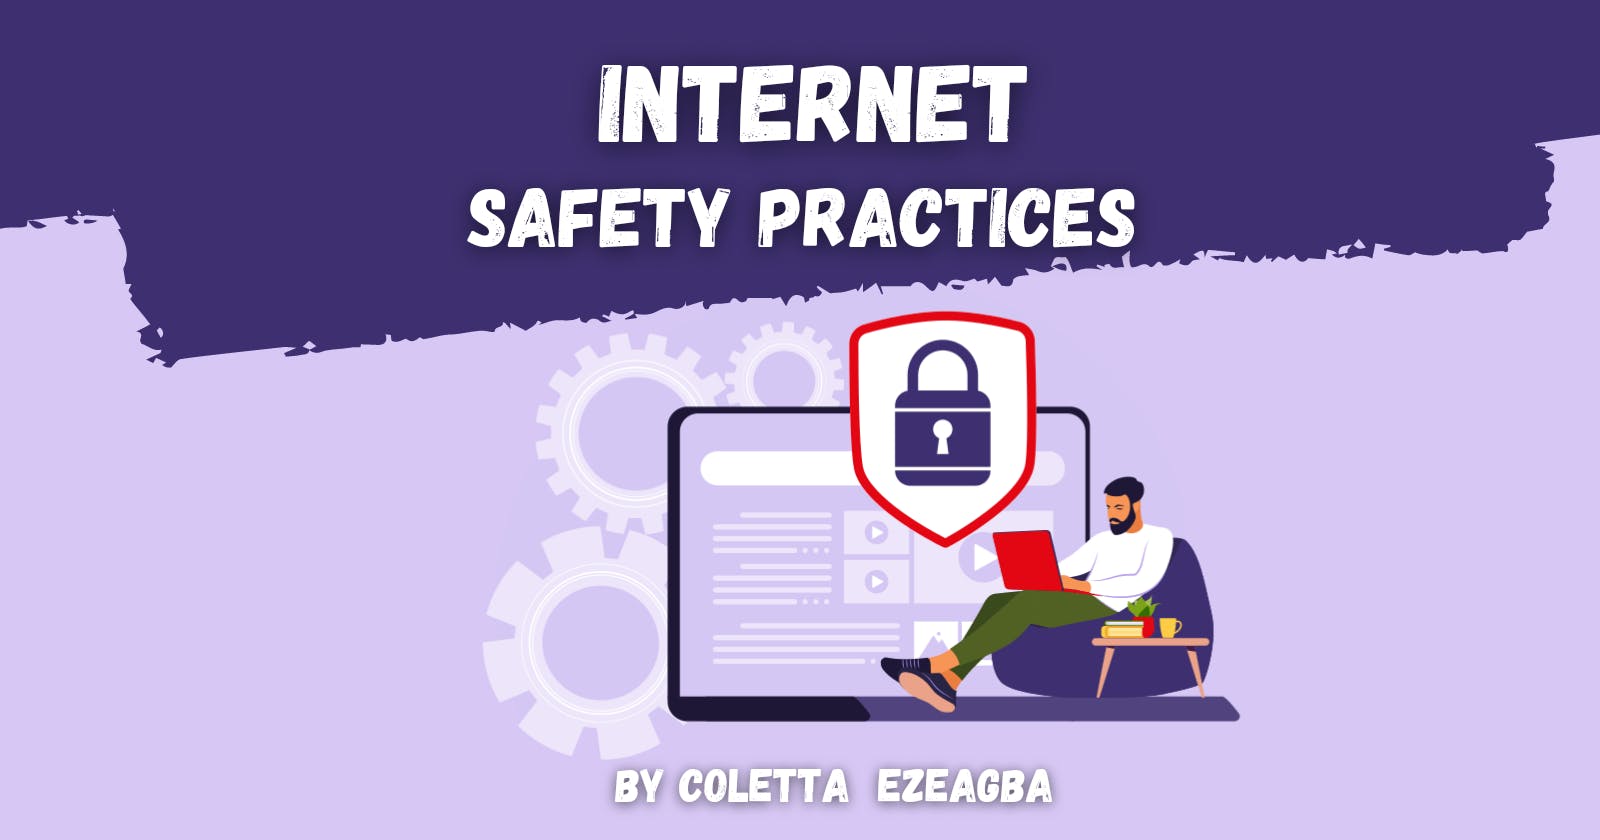 Internet Safety Practices